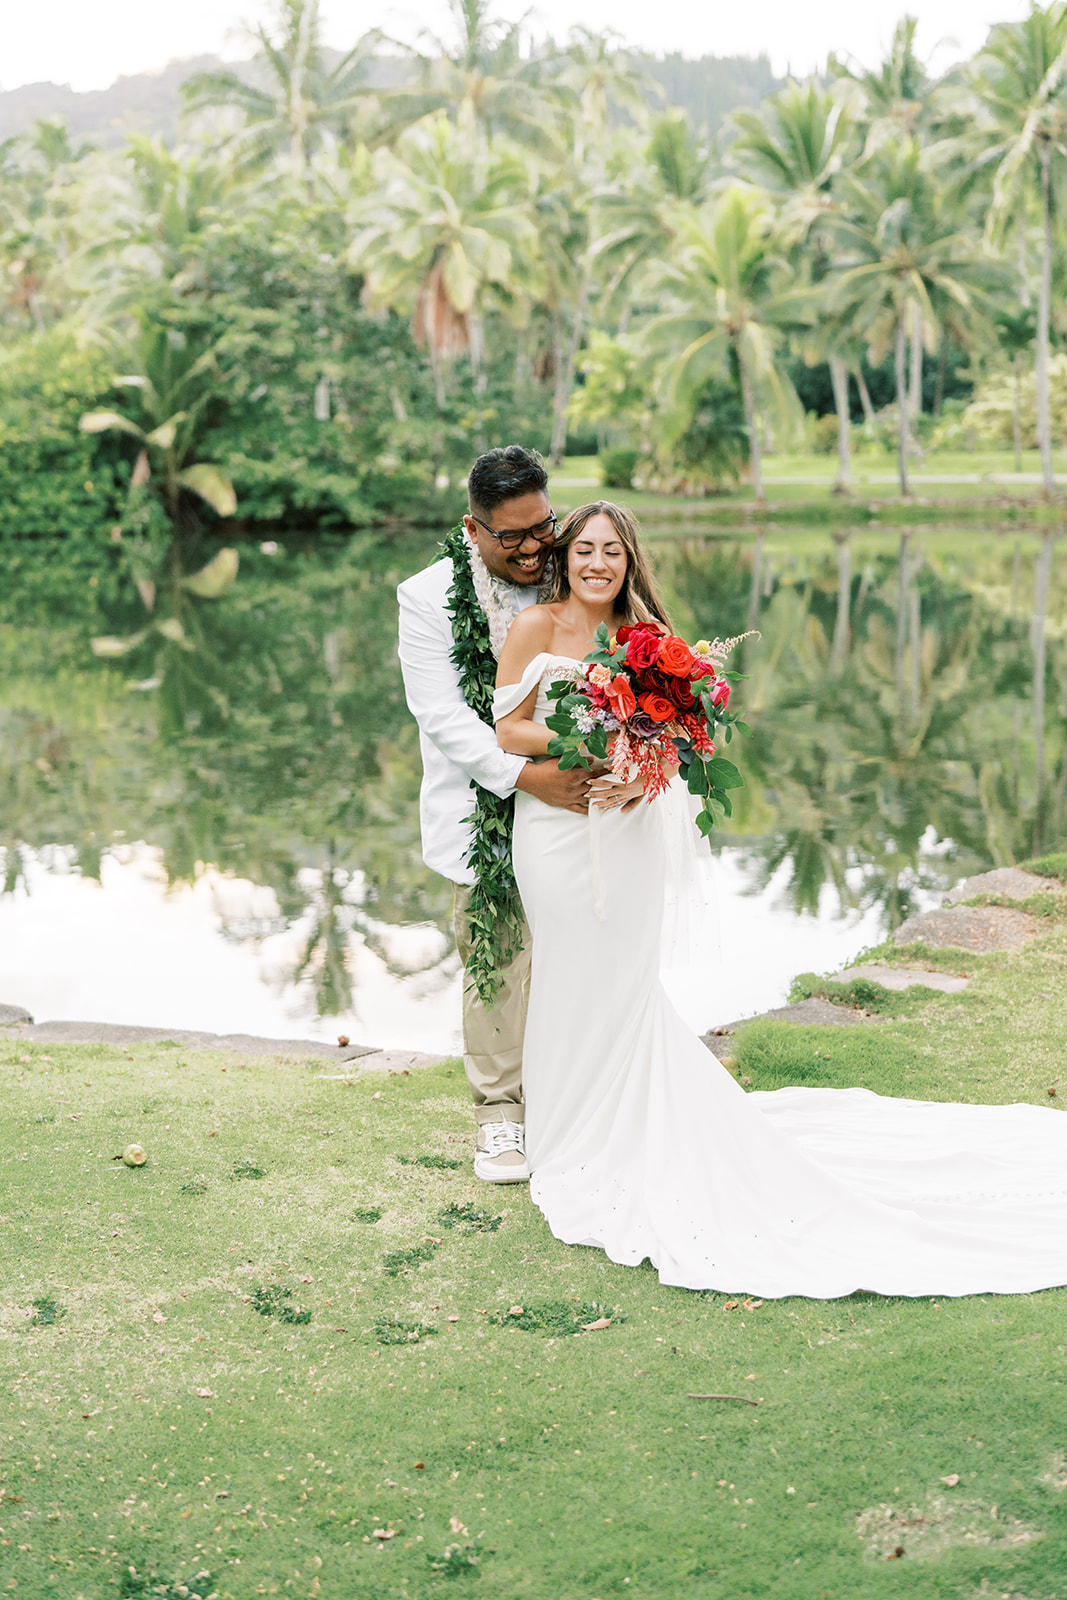 A joyful couple in wedding attire embracing beside a pond with lush greenery in the background.